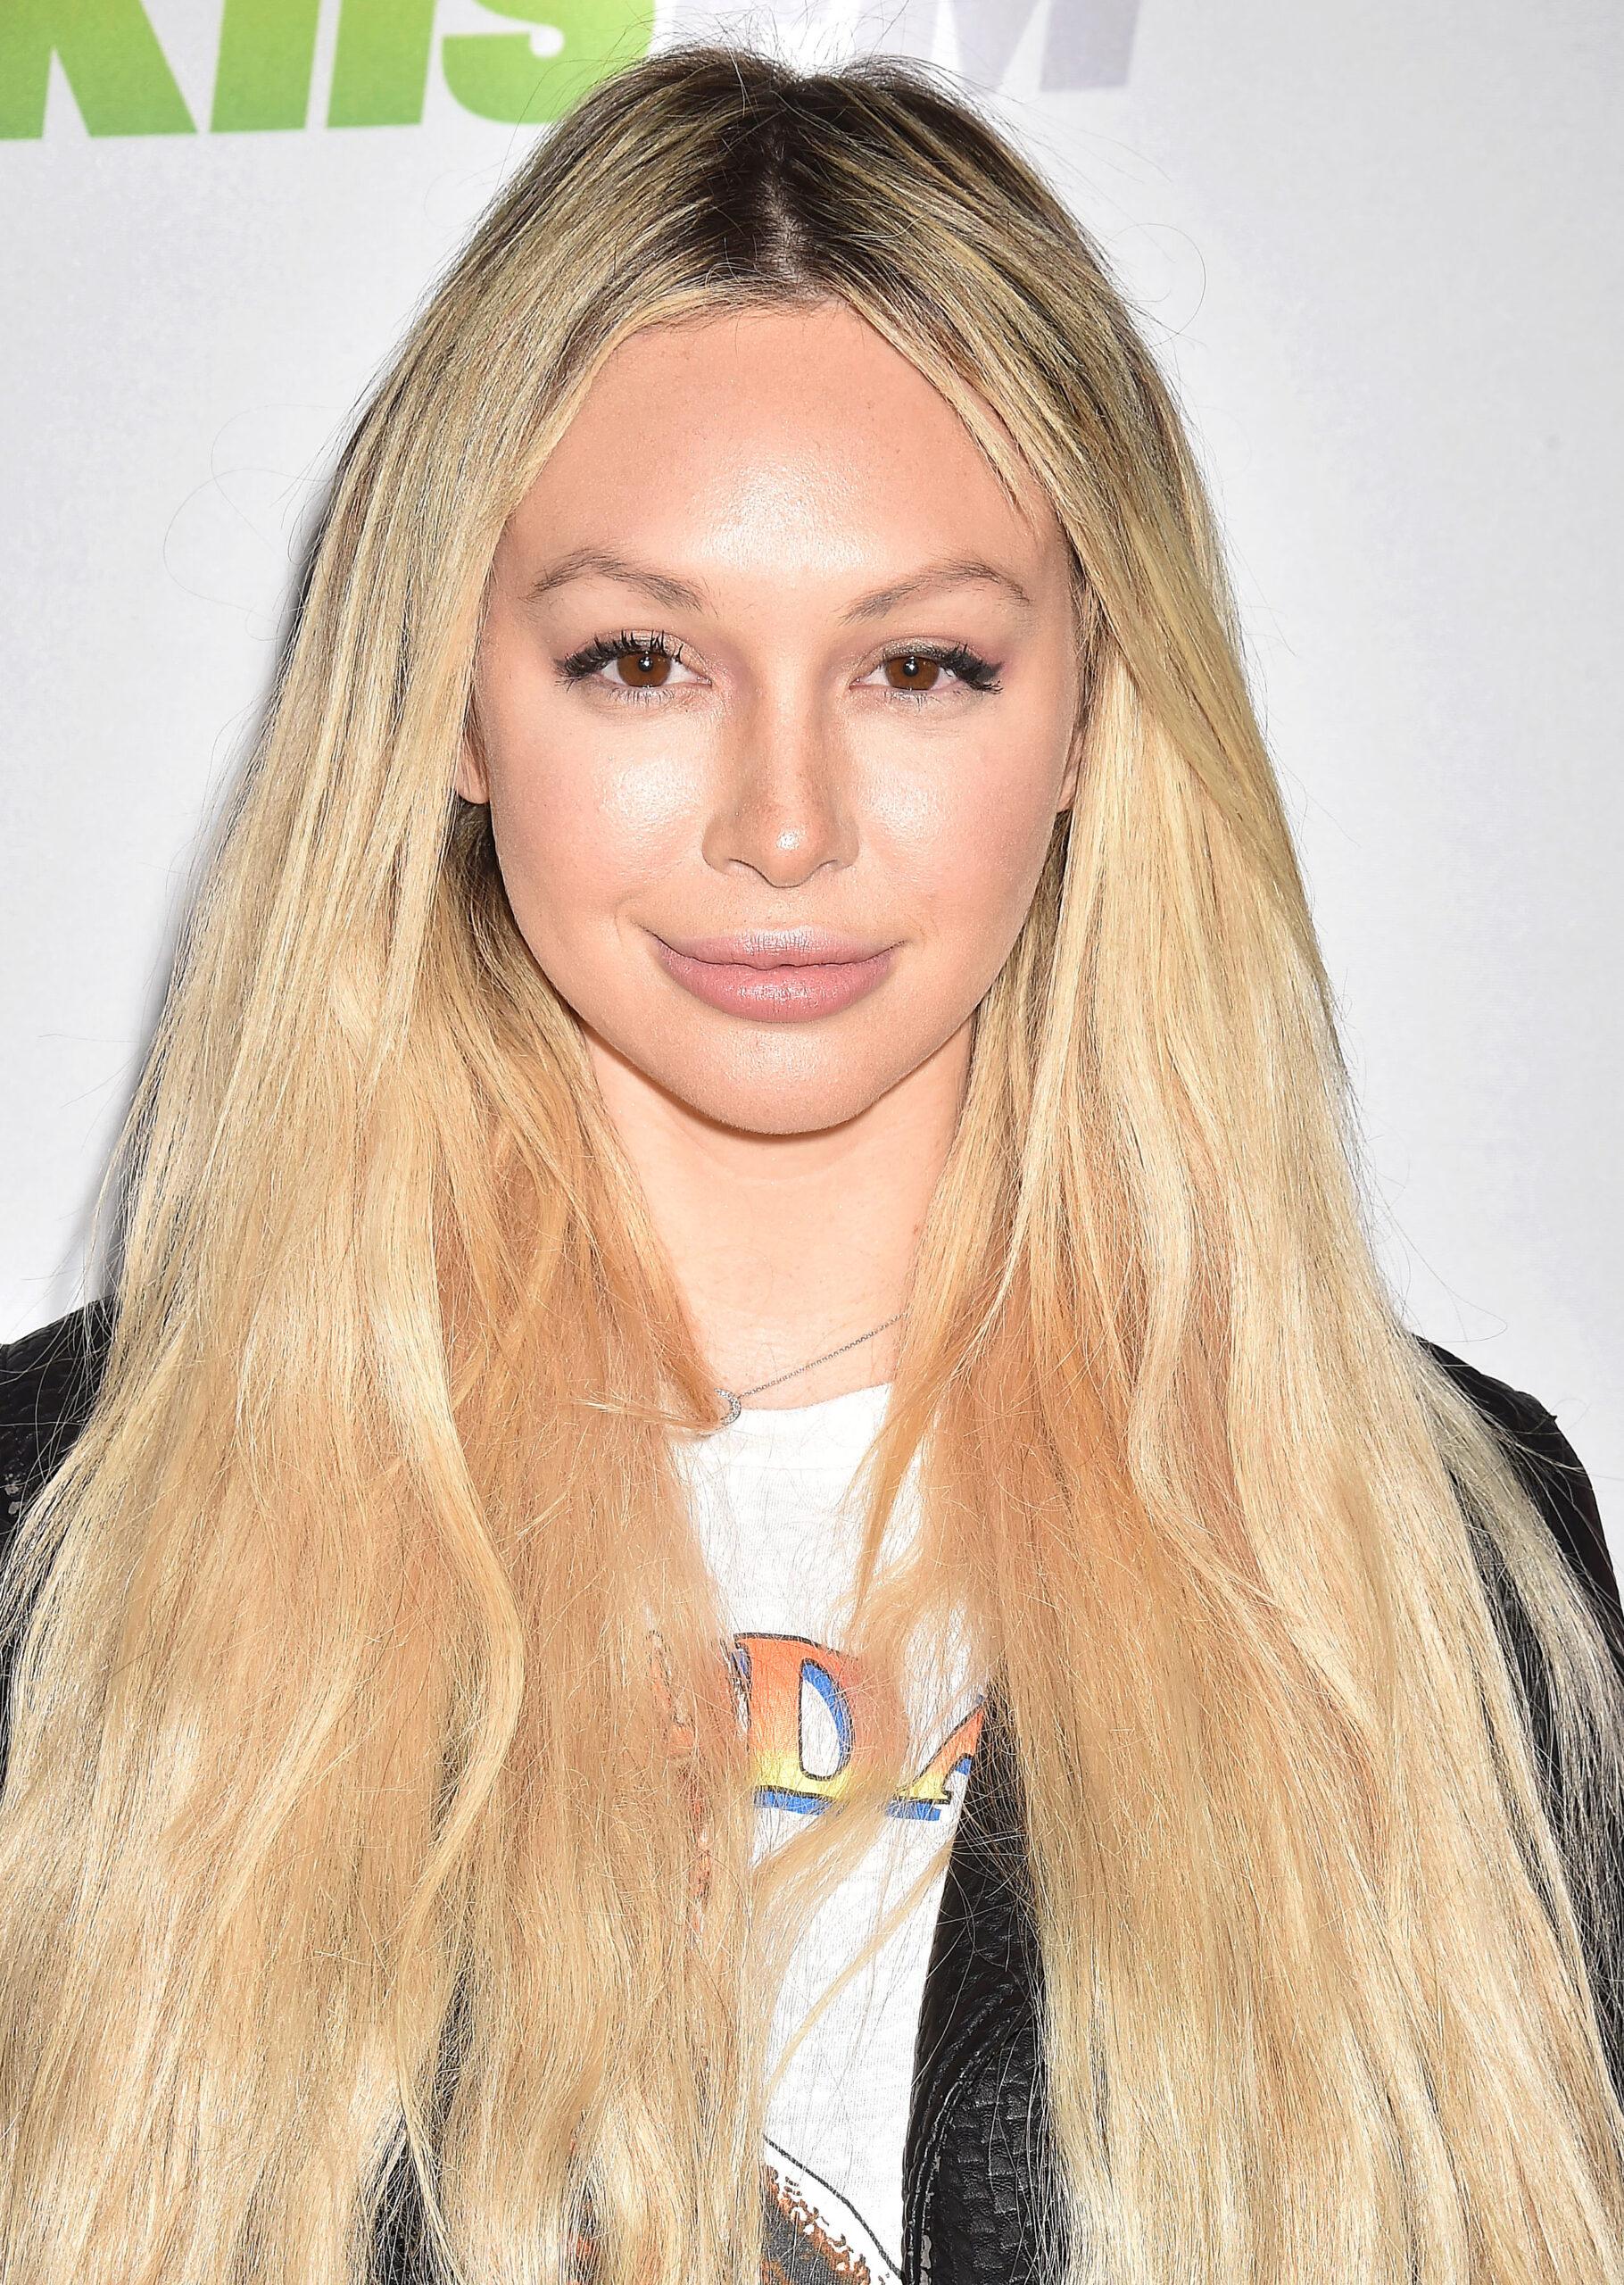 Corinne Olympios Put On Blast By 'House Of Villains' Co-Star